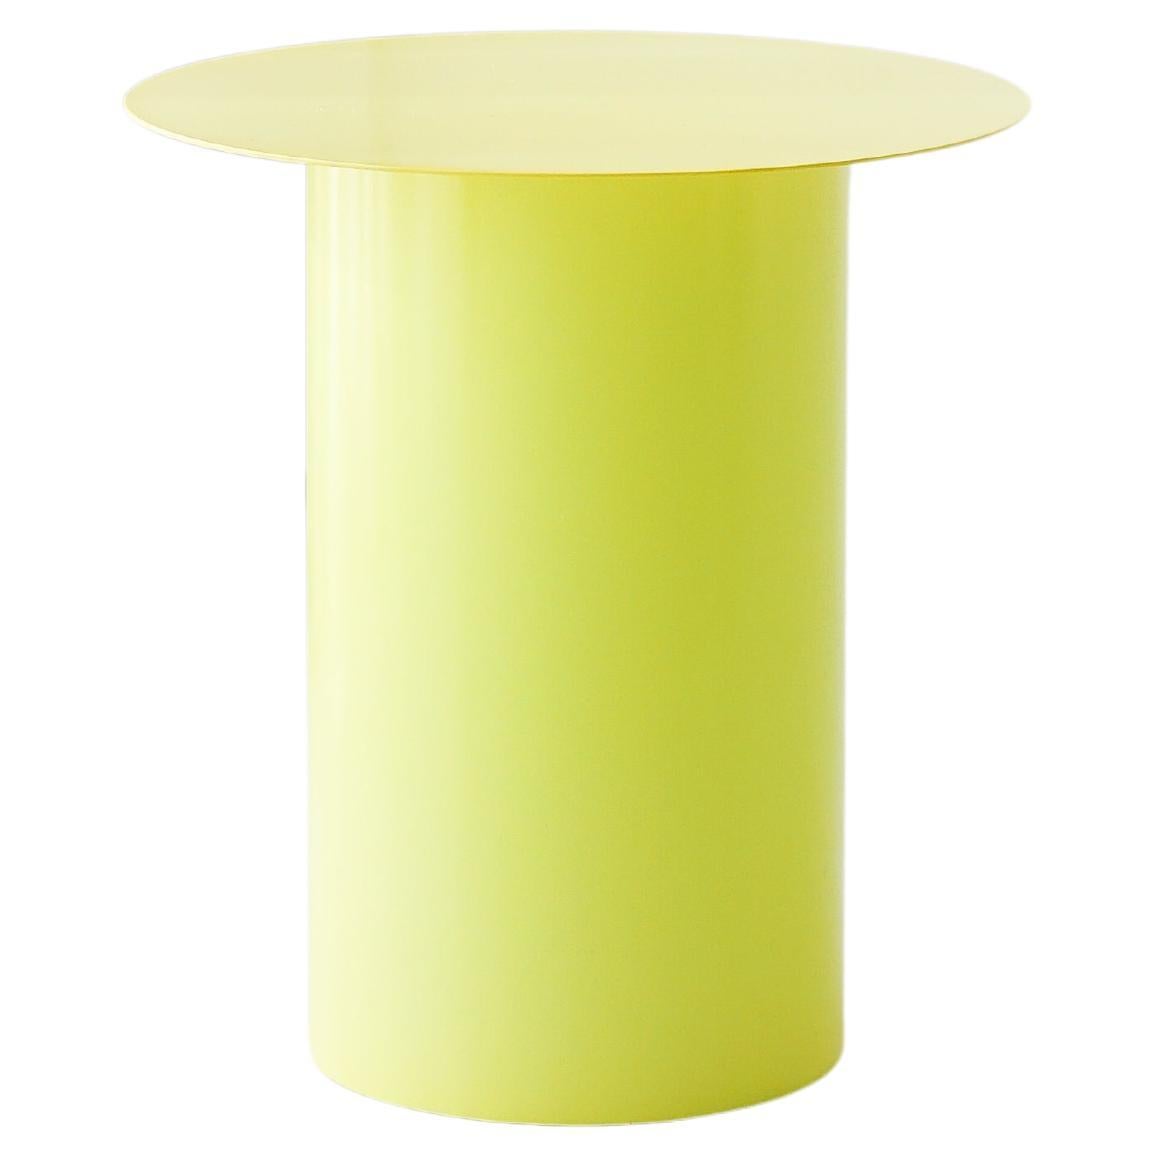 Chiodo 4 Side Iron Table, Neon Yellow For Sale